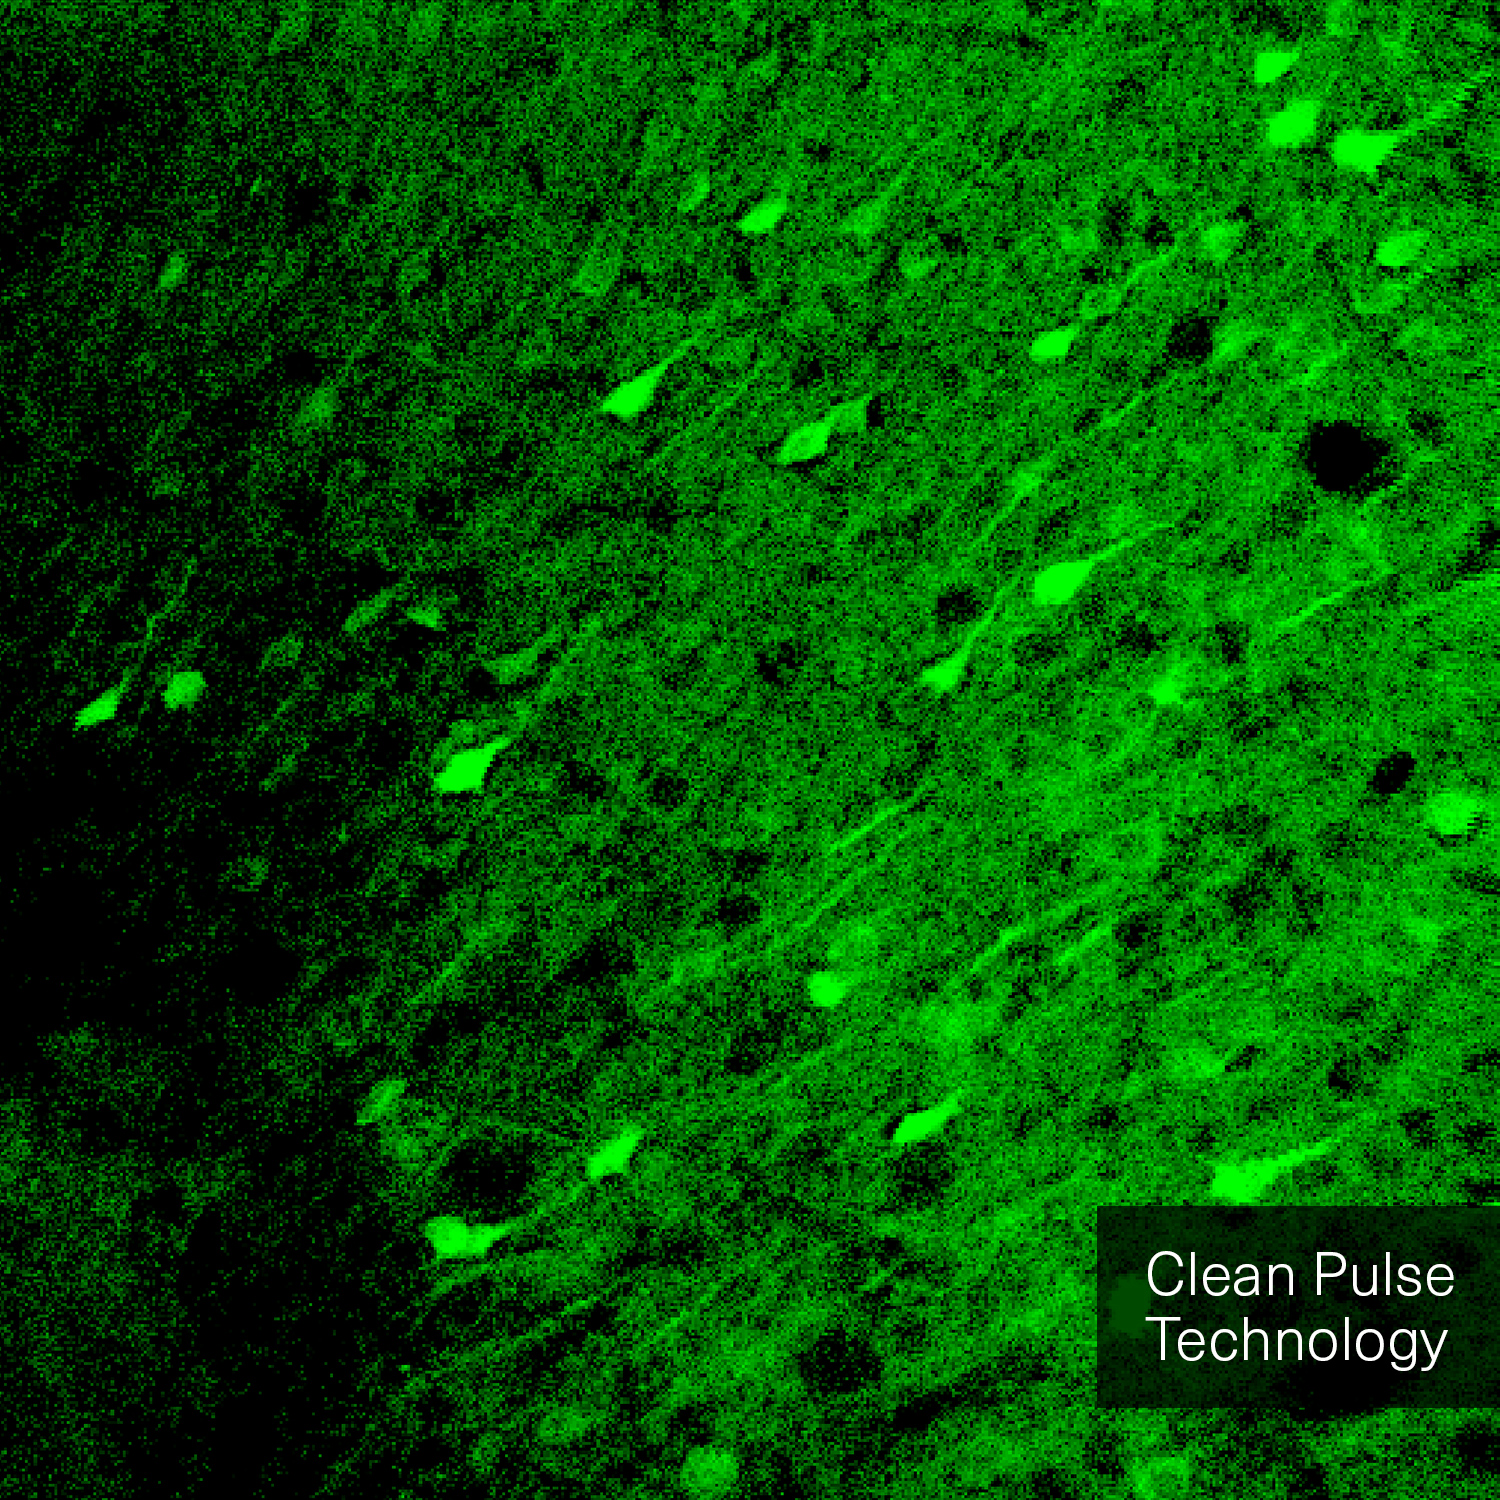 The image is a comparative visualization showing the difference between two microscopy techniques. On the left side, labeled "without Clean Pulse Technology," the image appears darker and less detailed. On the right side, labeled "with Clean Pulse Technology," the image is brighter and shows more distinct and clear details of the microscopic sample. A vertical line divides the two halves, with a circular icon featuring arrows pointing left and right at the center, indicating the comparison. The background of both sides is green, highlighting the improvements in image clarity and brightness achieved with Clean Pulse Technology.